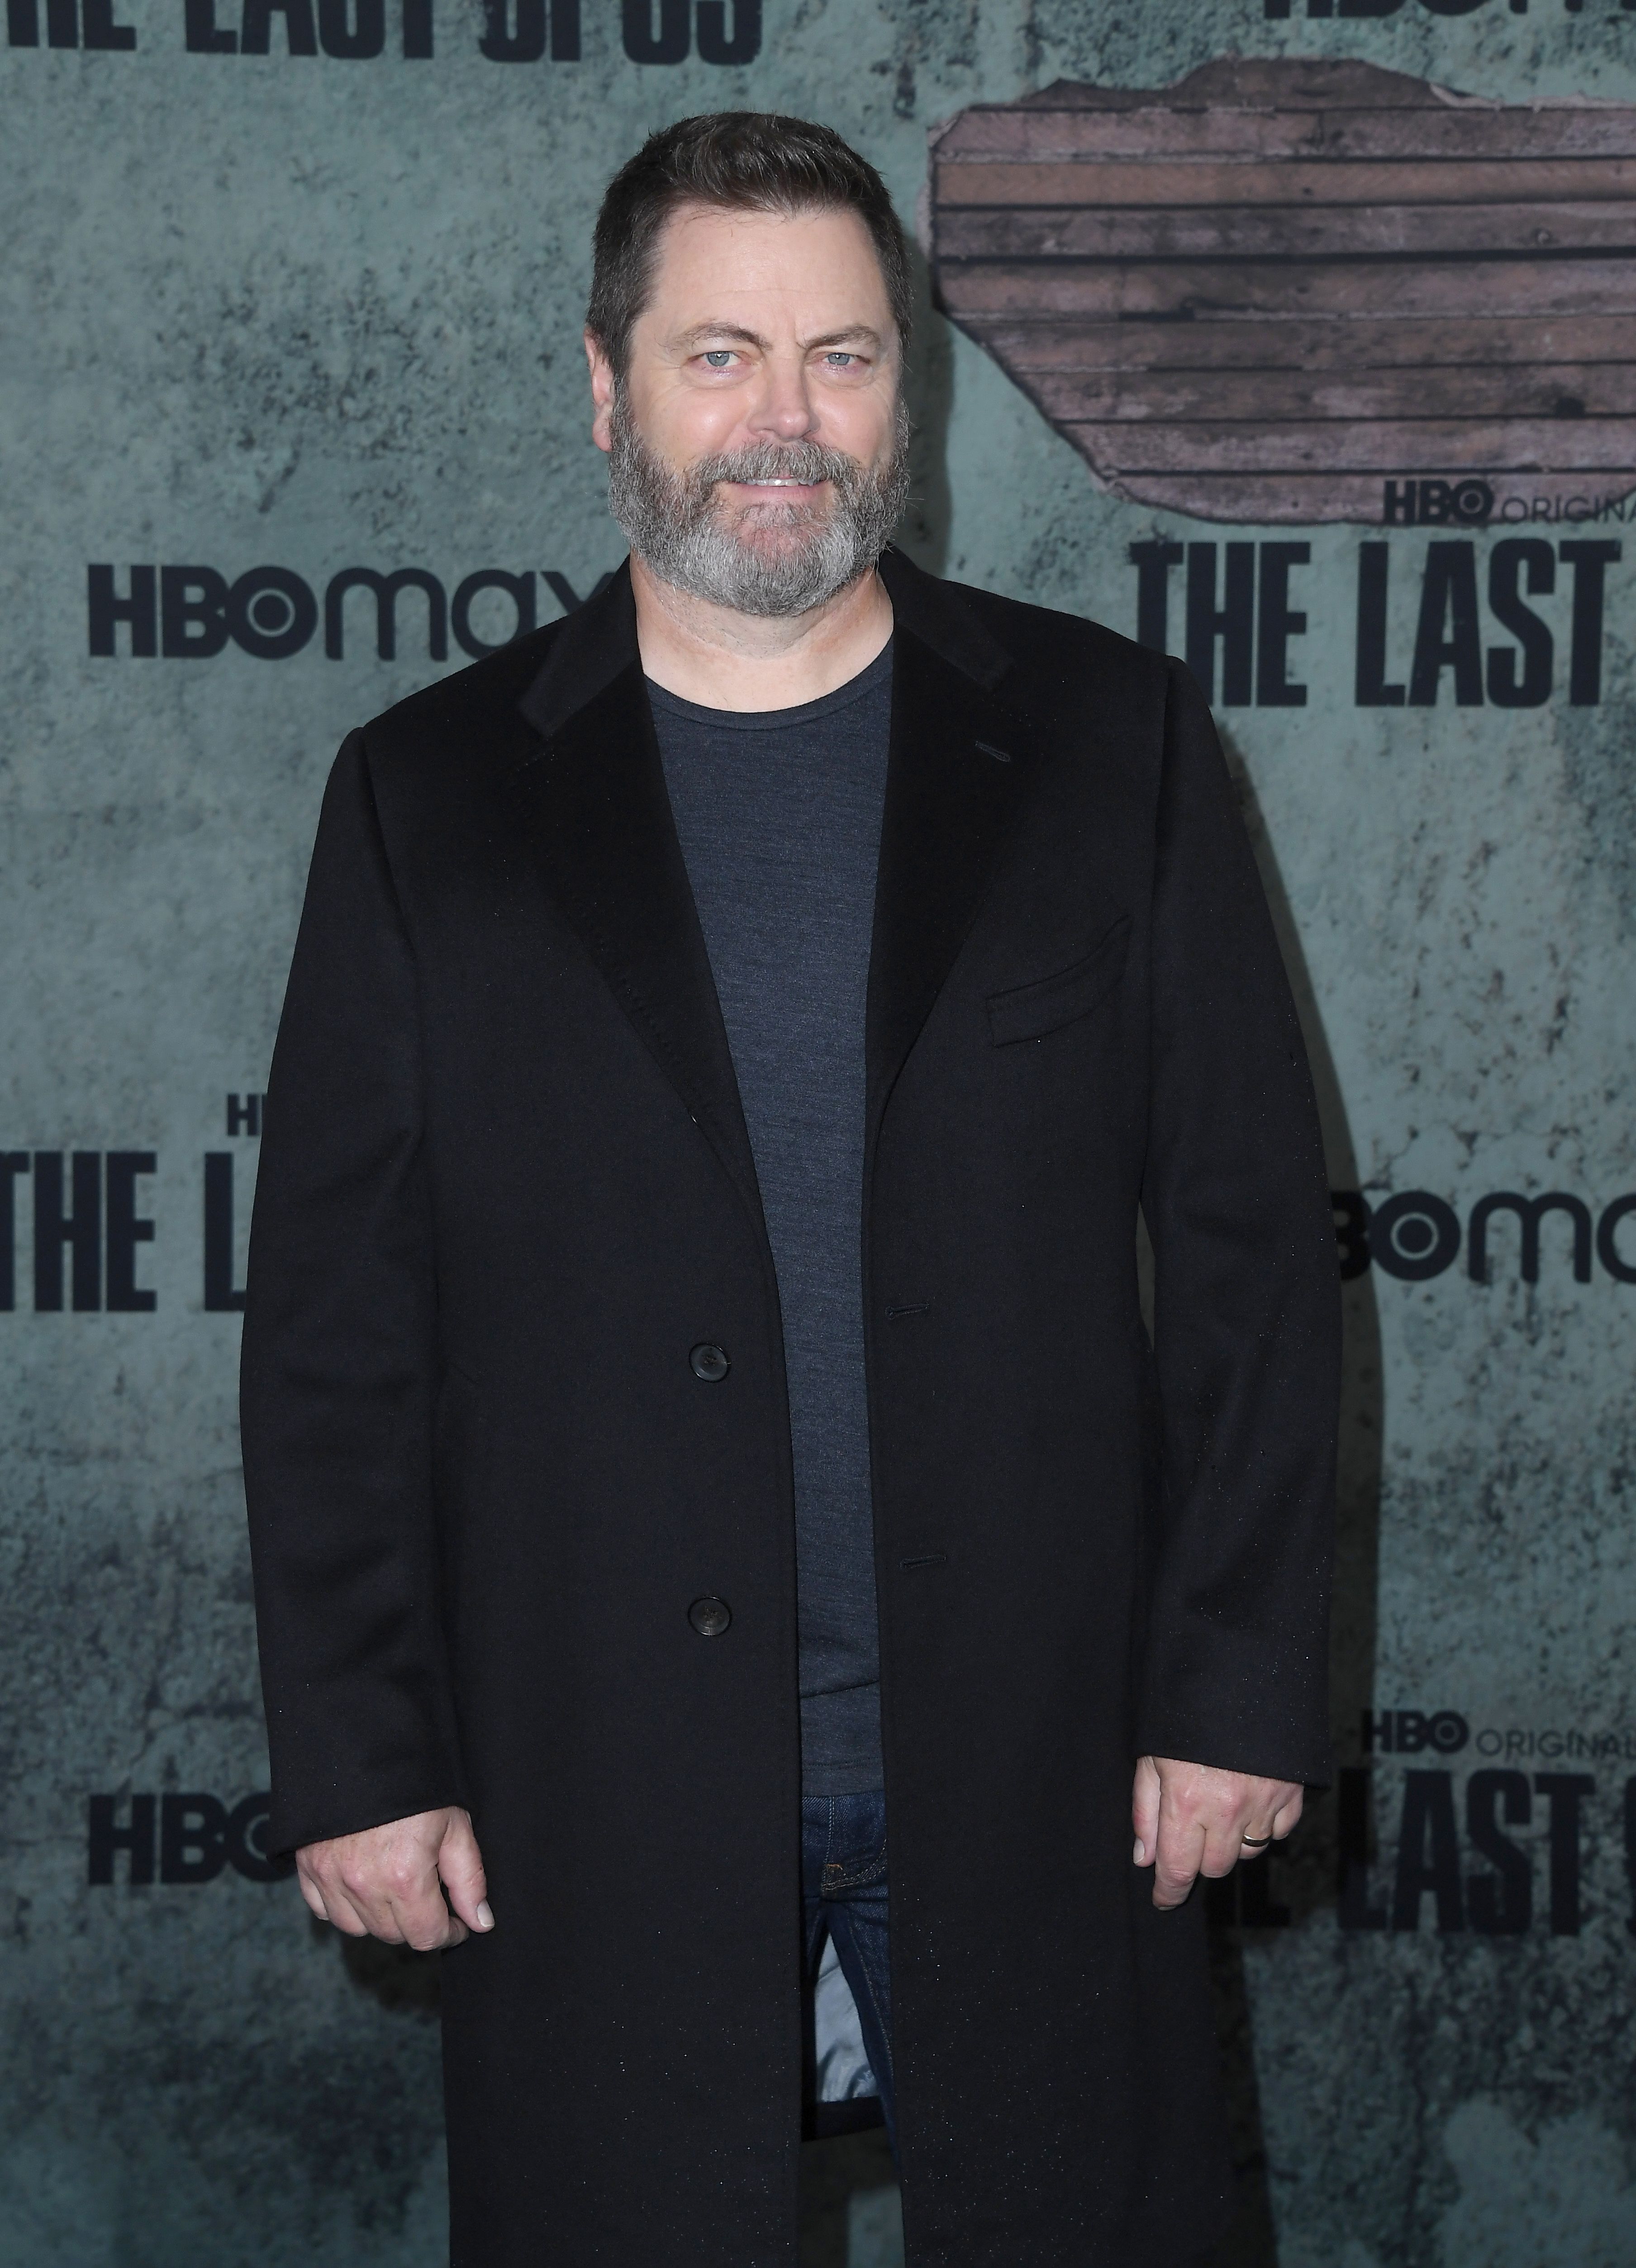 She's the curator'': The Last of Us star Nick Offerman reveals his wife  convinced him to star in heartbreaking episode 3